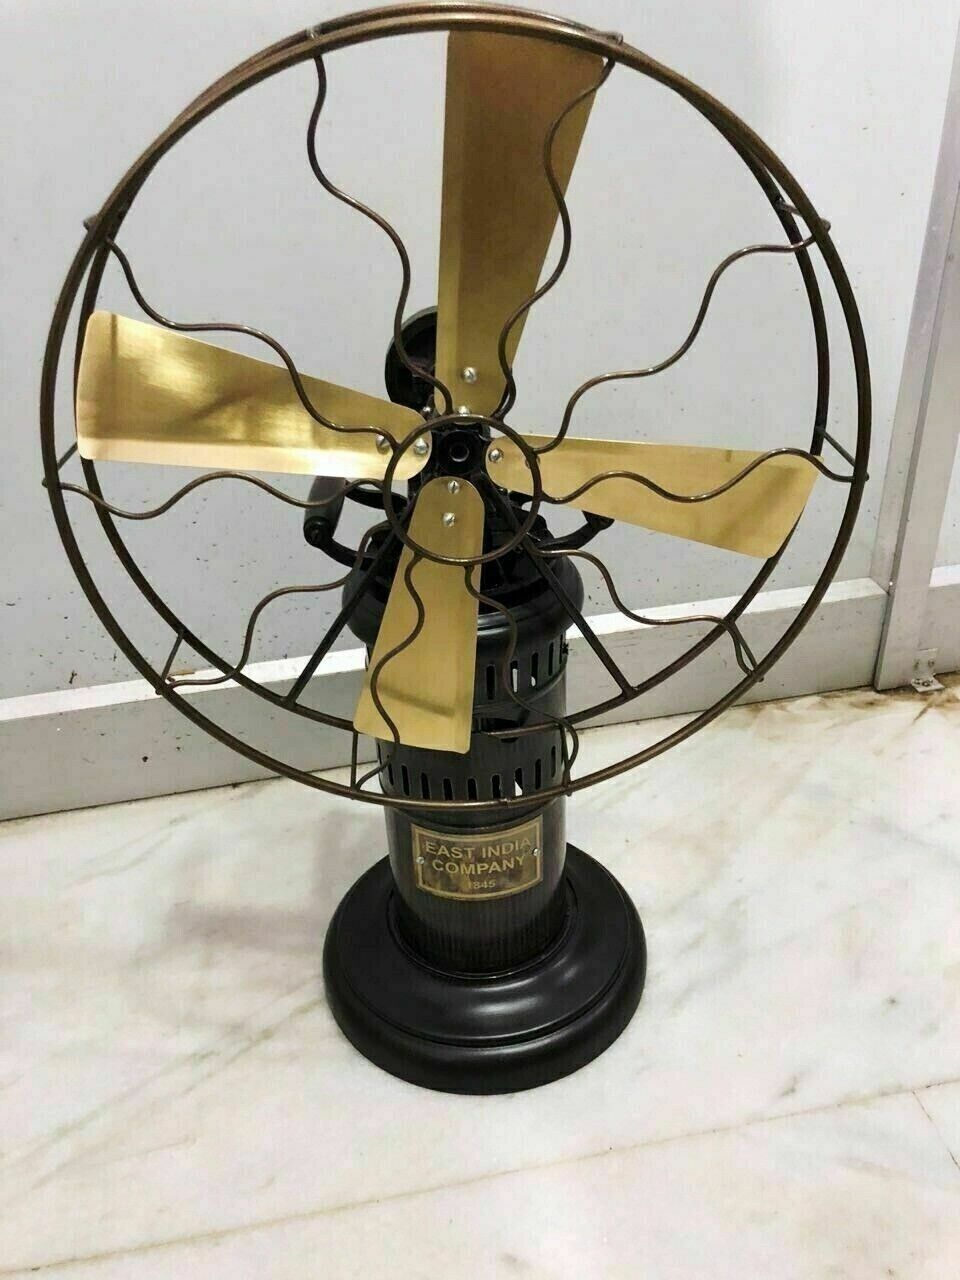 Steam Motor Fan Kerosene Oil Operated Working Table Collectibles Museum